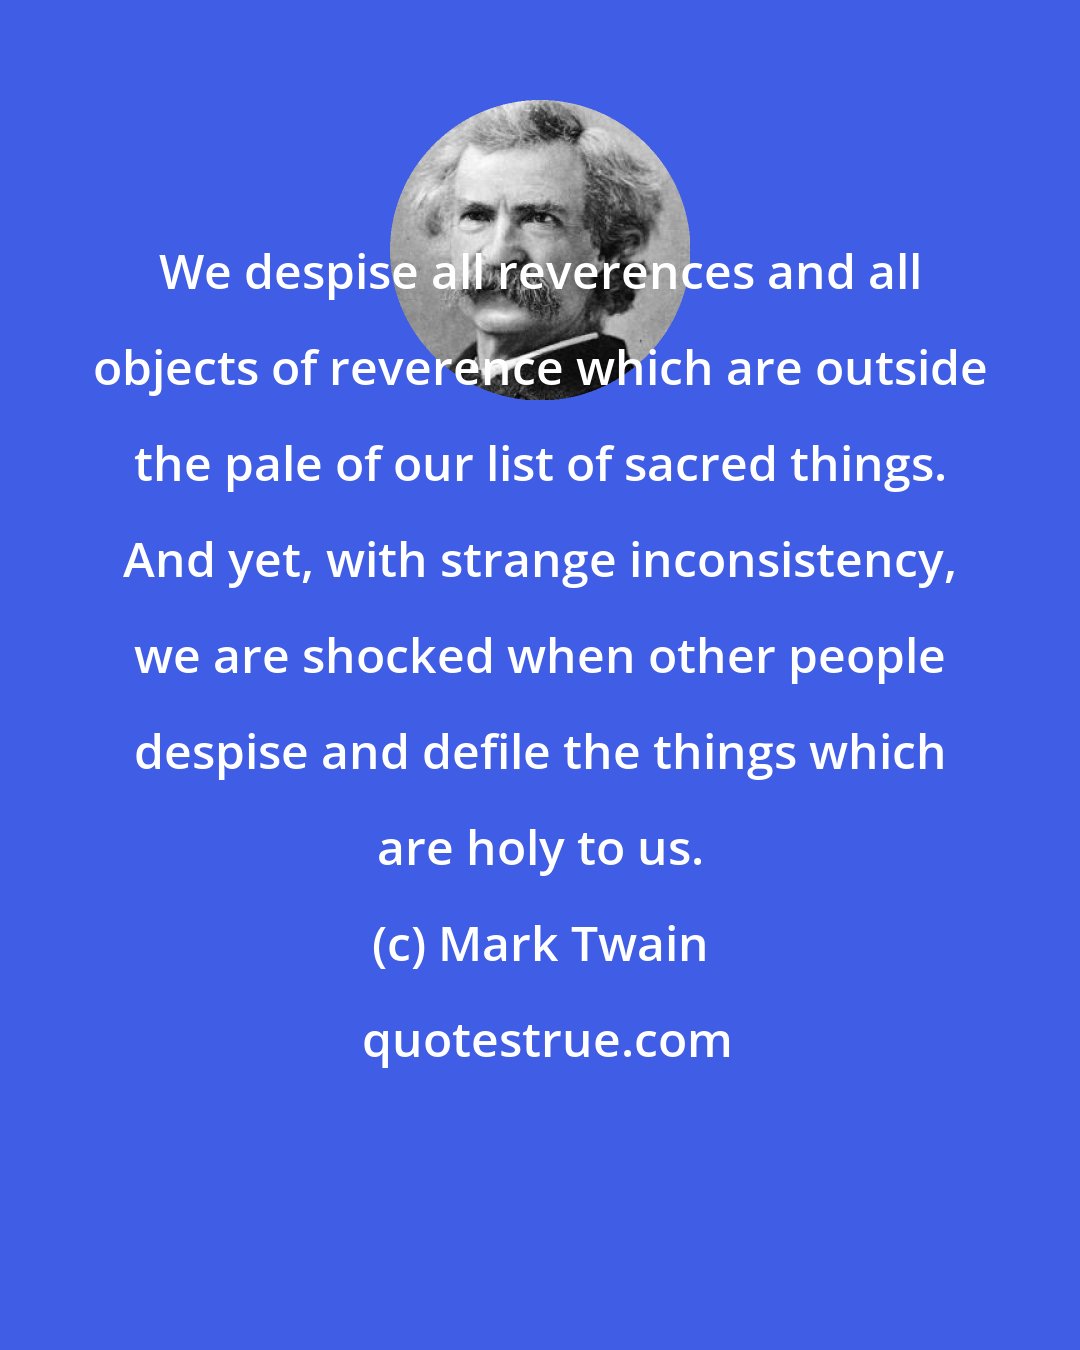 Mark Twain: We despise all reverences and all objects of reverence which are outside the pale of our list of sacred things. And yet, with strange inconsistency, we are shocked when other people despise and defile the things which are holy to us.